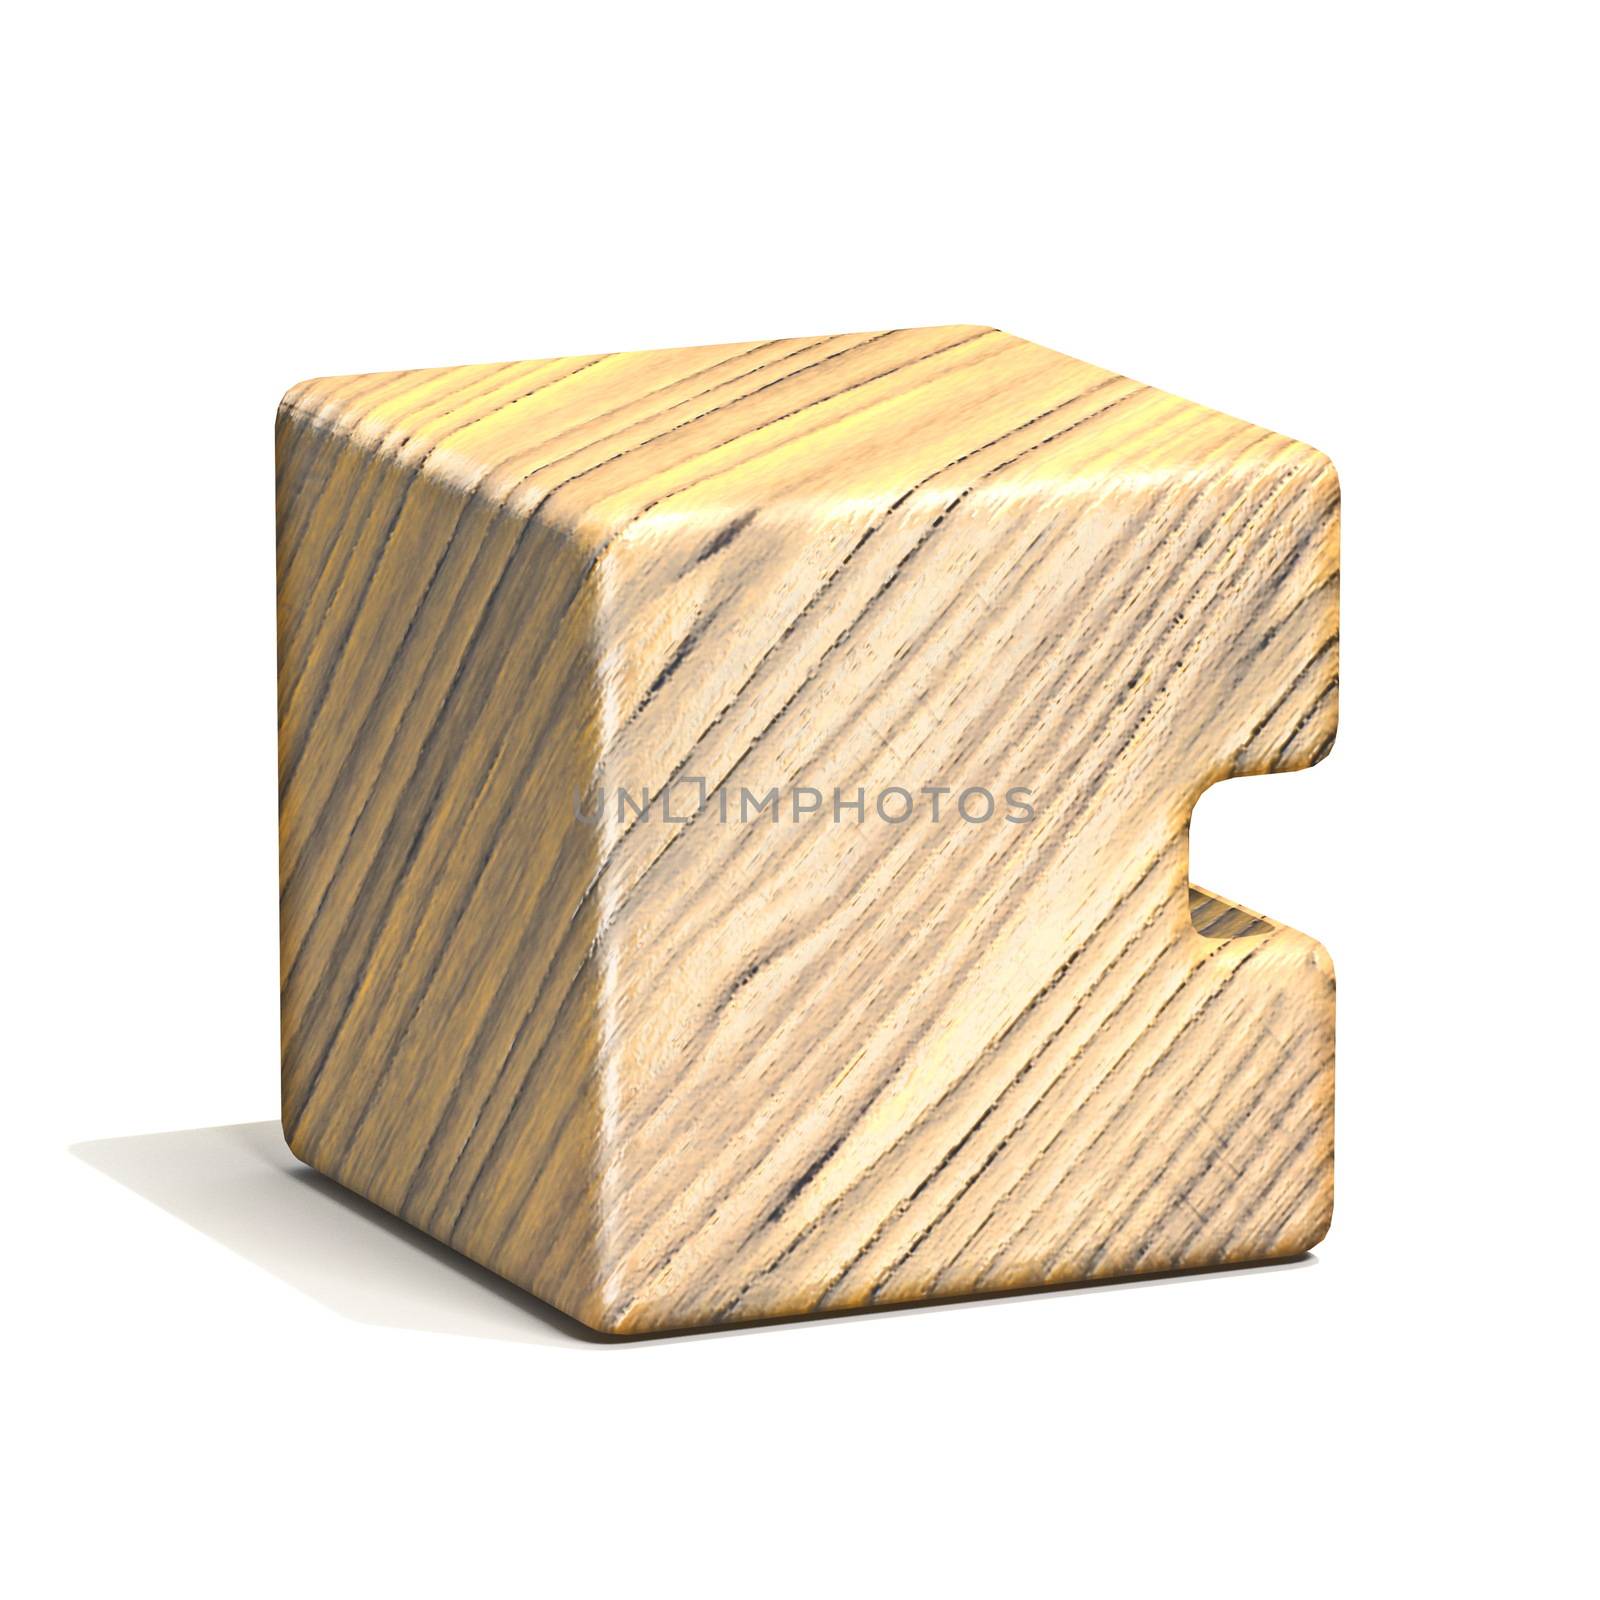 Solid wooden cube font Letter C 3D render illustration isolated on white background